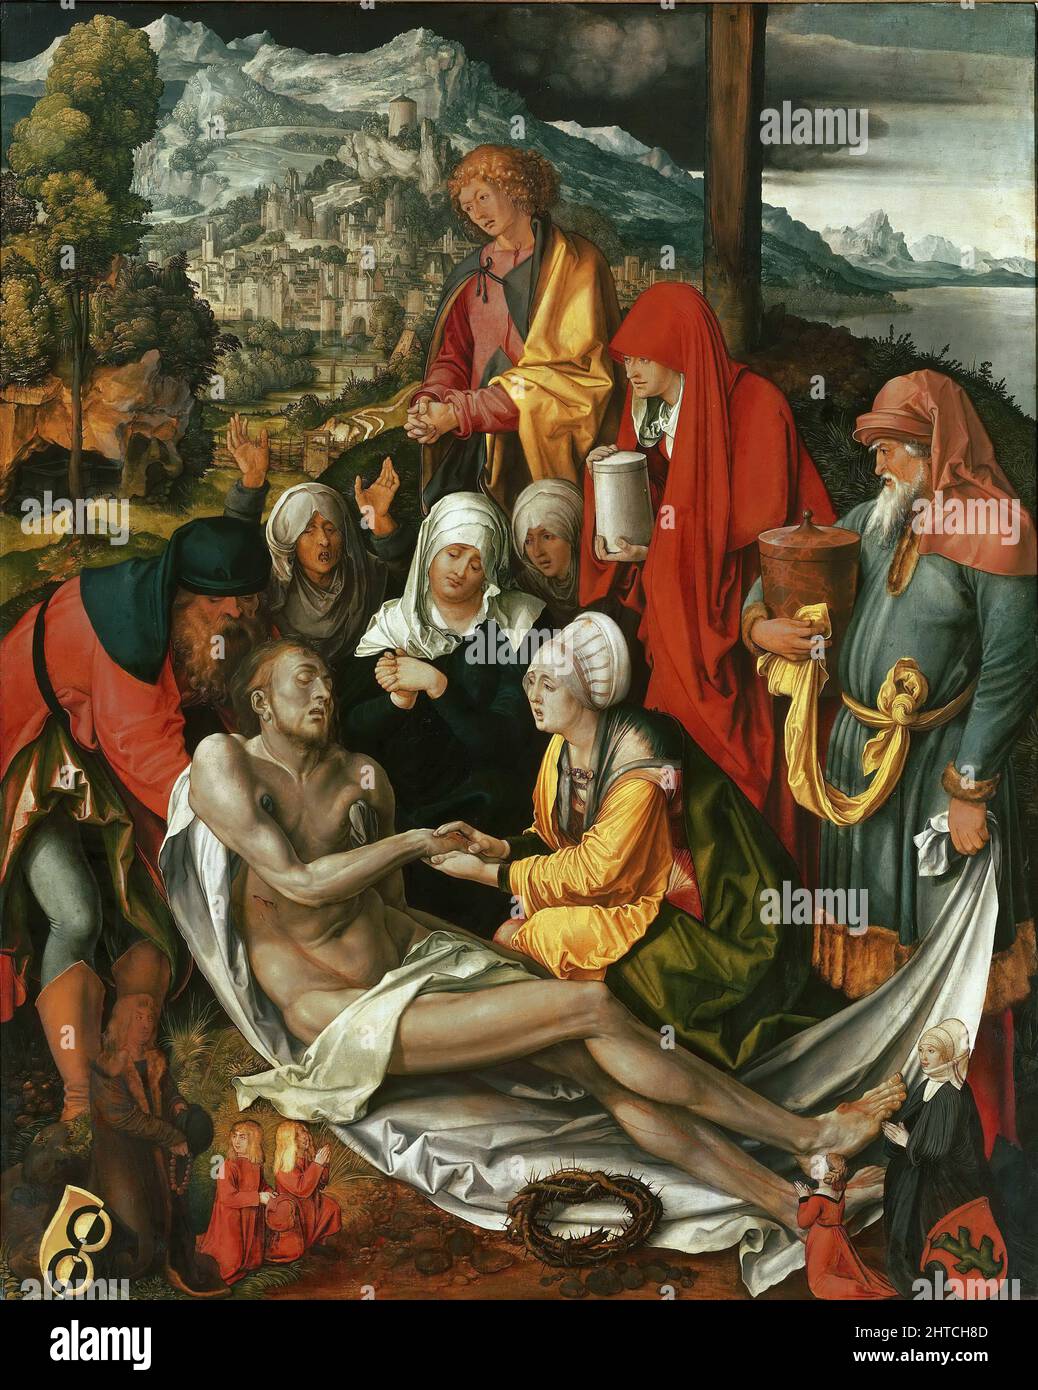 Lamentation of Christ (Glimm Lamentation), c. 1500. Found in the Collection of the Alte Pinakothek, Munich. Stock Photo